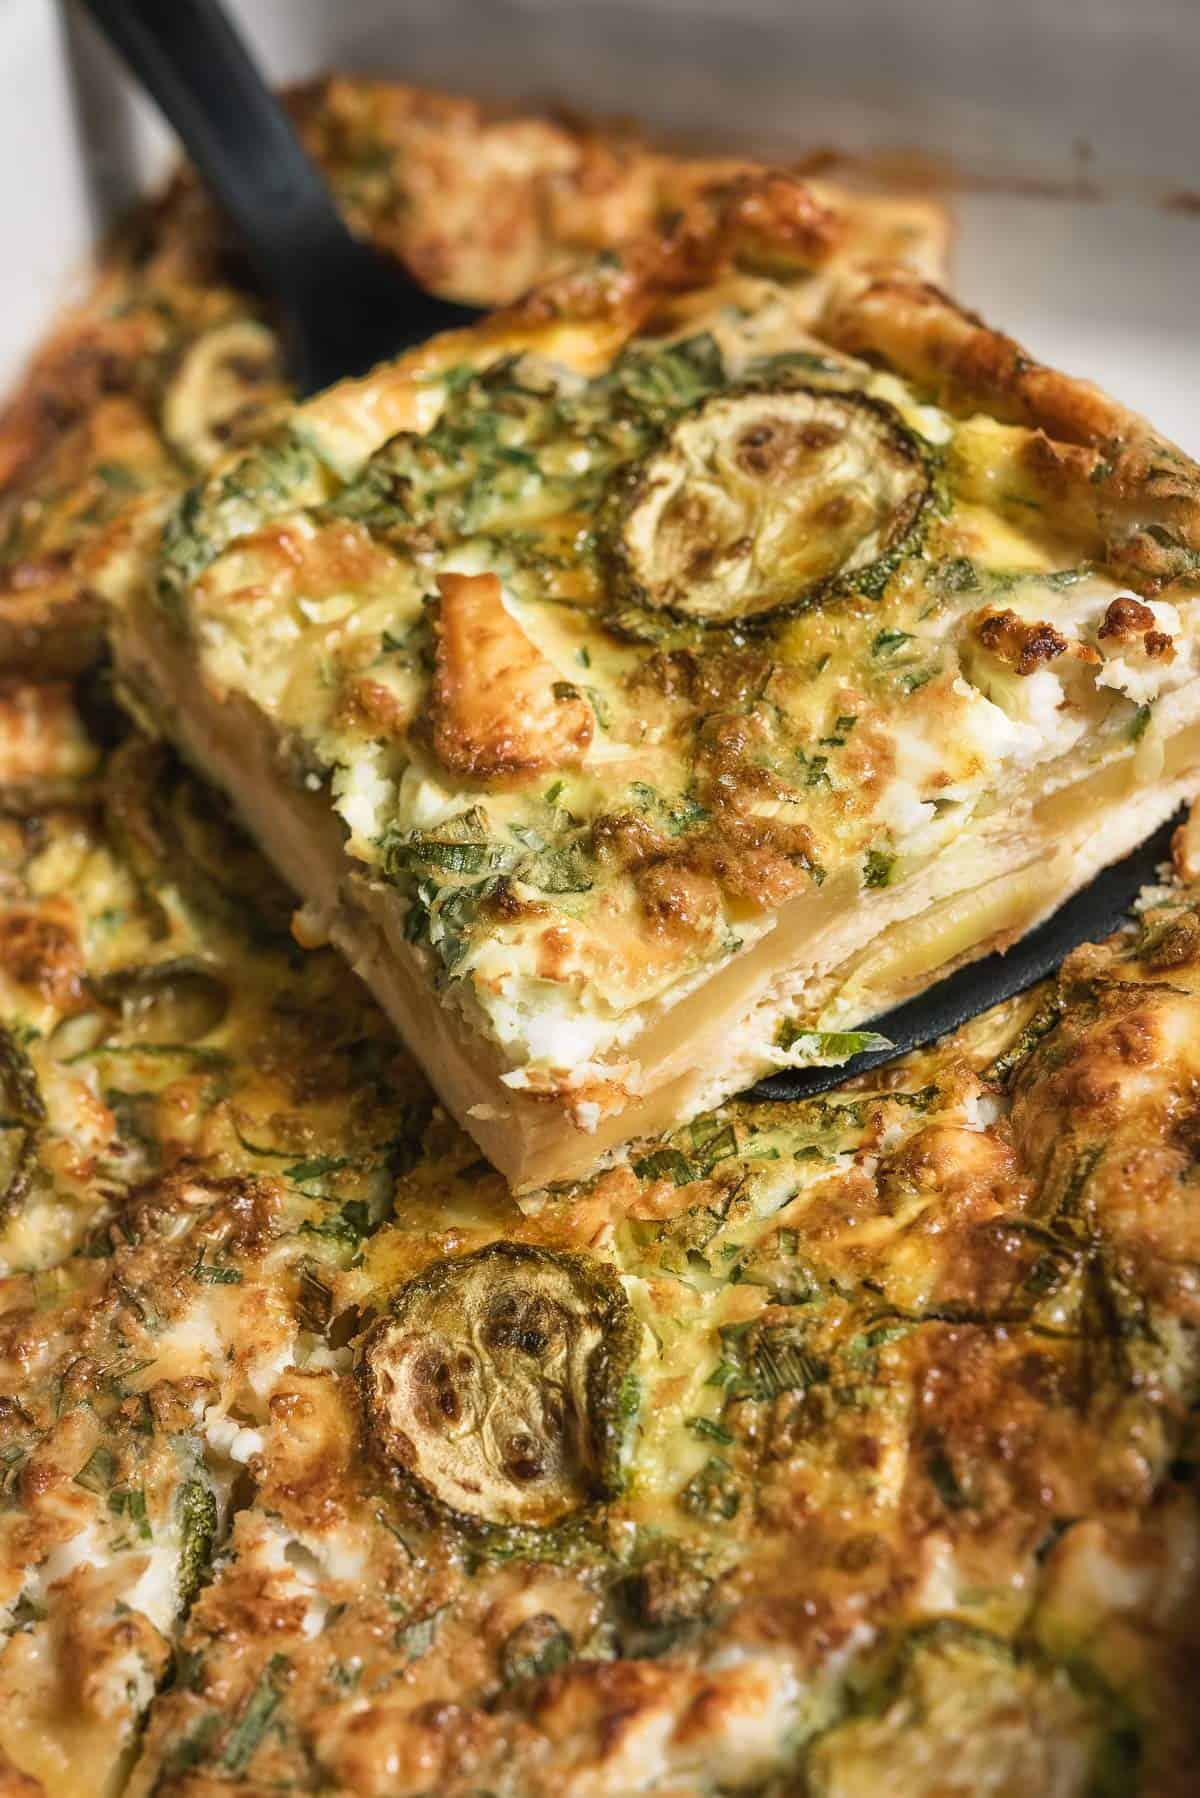 Oven Omelette With Zucchini And Potatoes